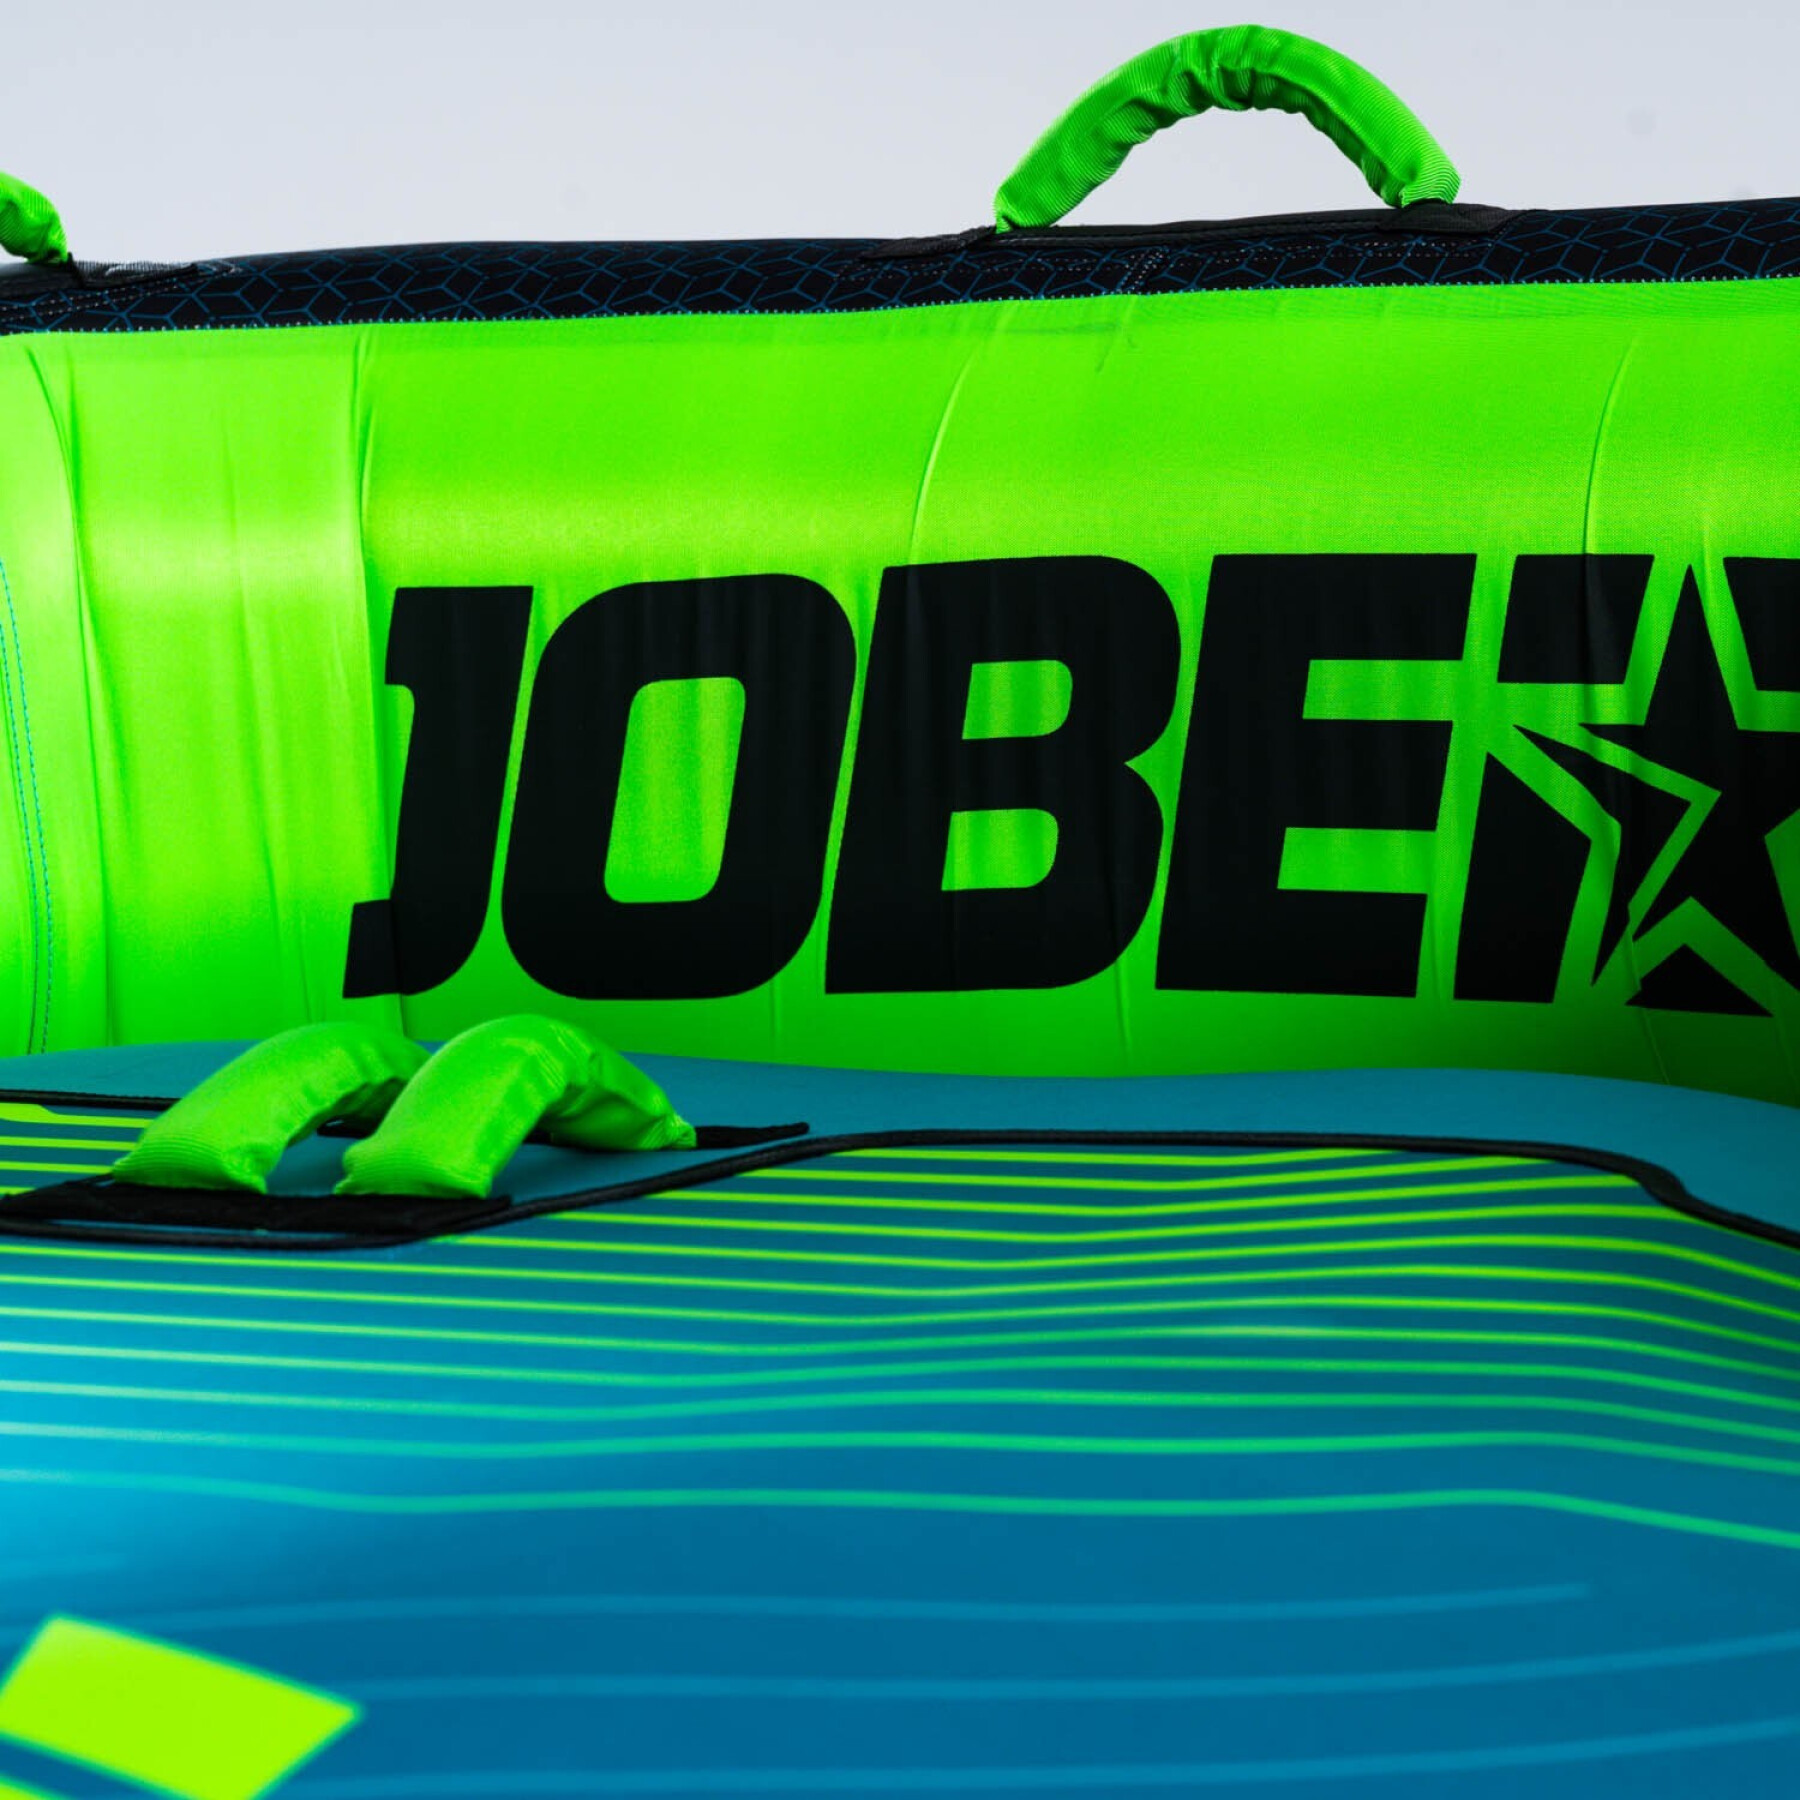 Towed buoy for 2 people Jobe Sports Binar Towable